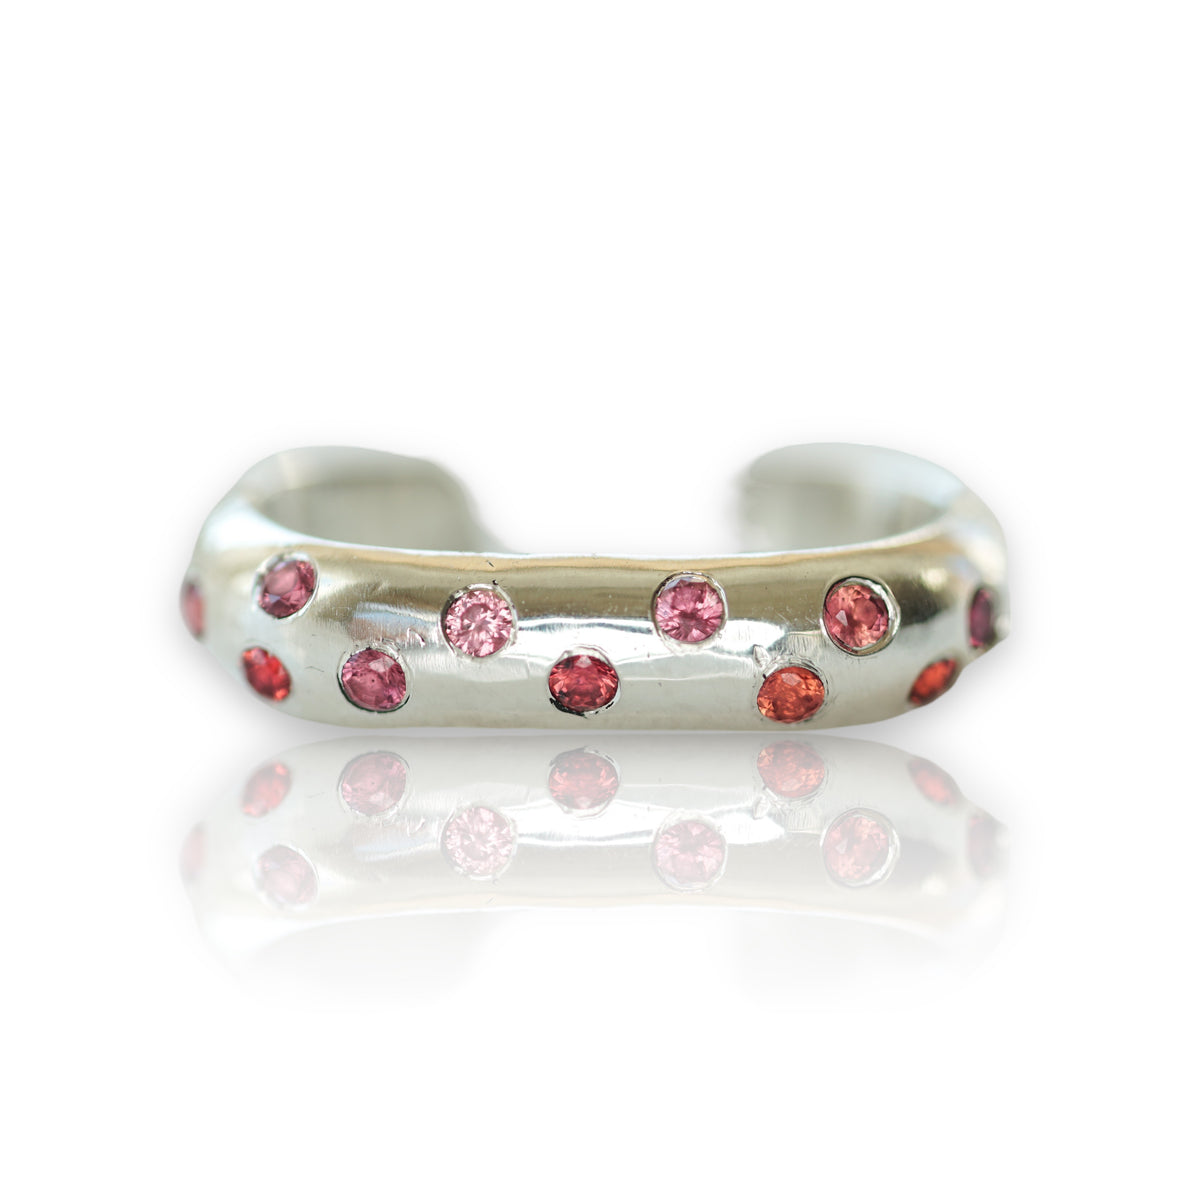 Pink/Red sapphire ear cuff in silver - large